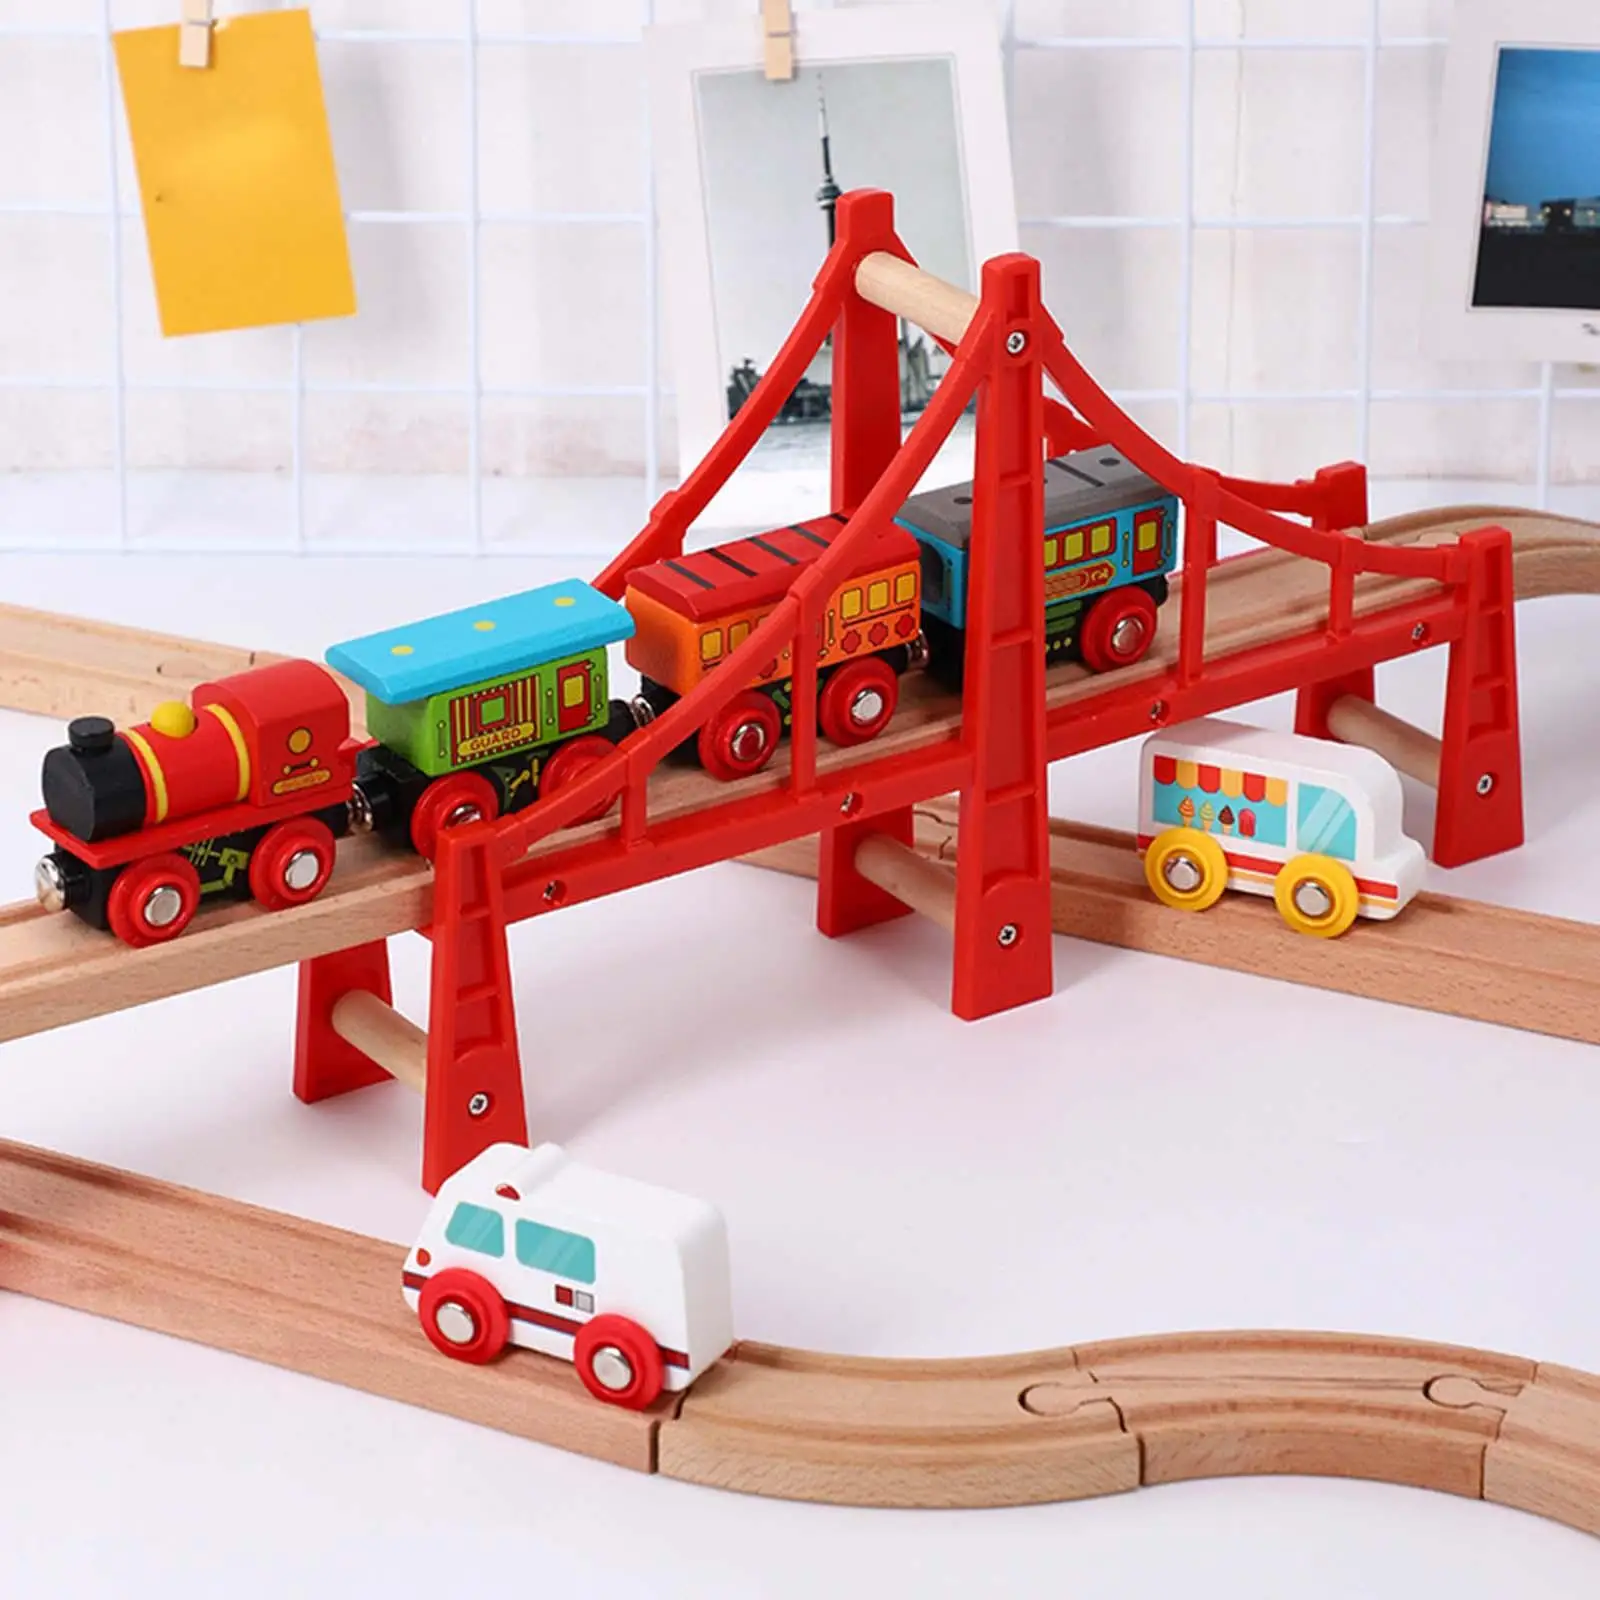 Wood Train Tracks Toys Accessories Bridge Educational Toy for Birthday Gift